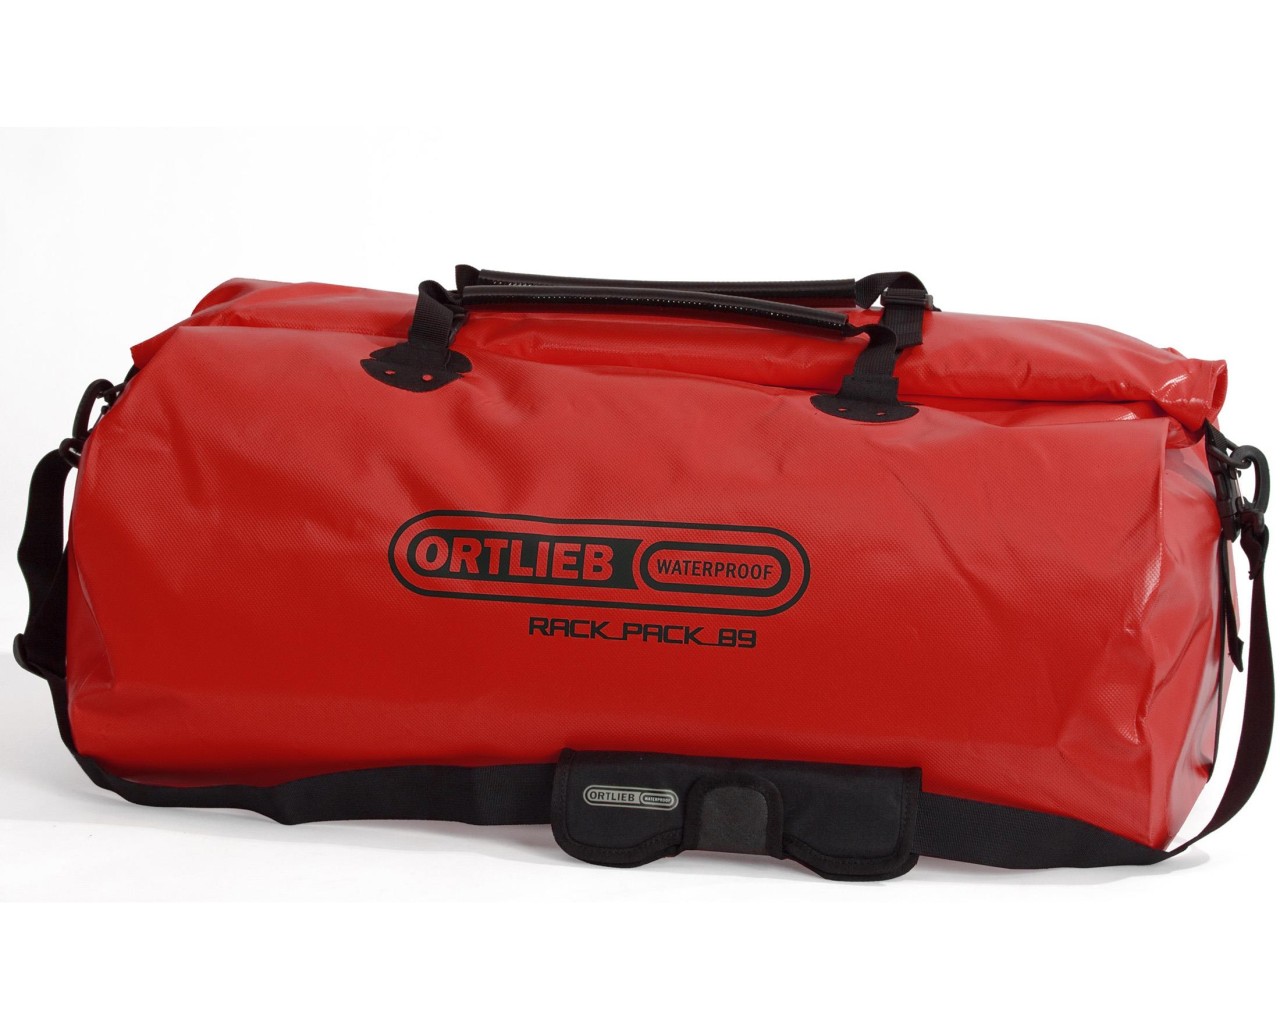 Ortlieb Rack-Pack P620 waterproof bag 89 litres - size L | red